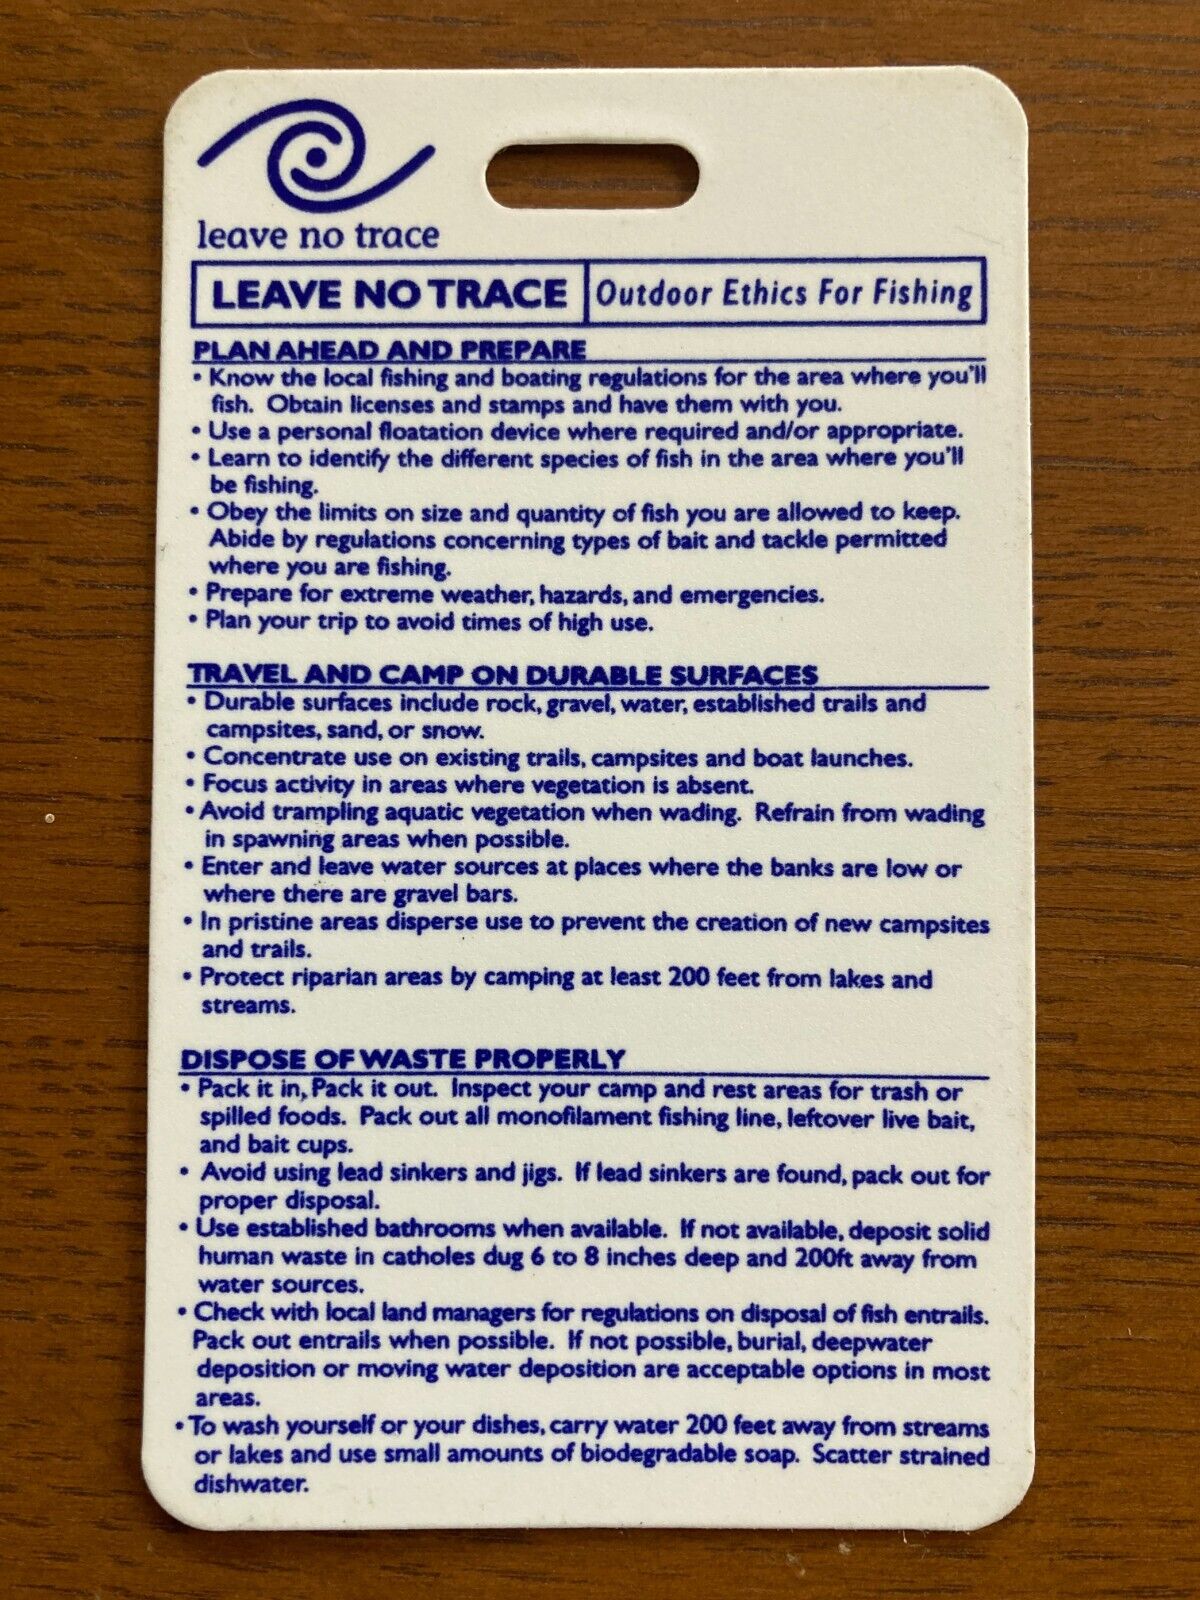 State National Park BSA Leave No Trace (LNT) Outdoor Ethics for Fishing Card